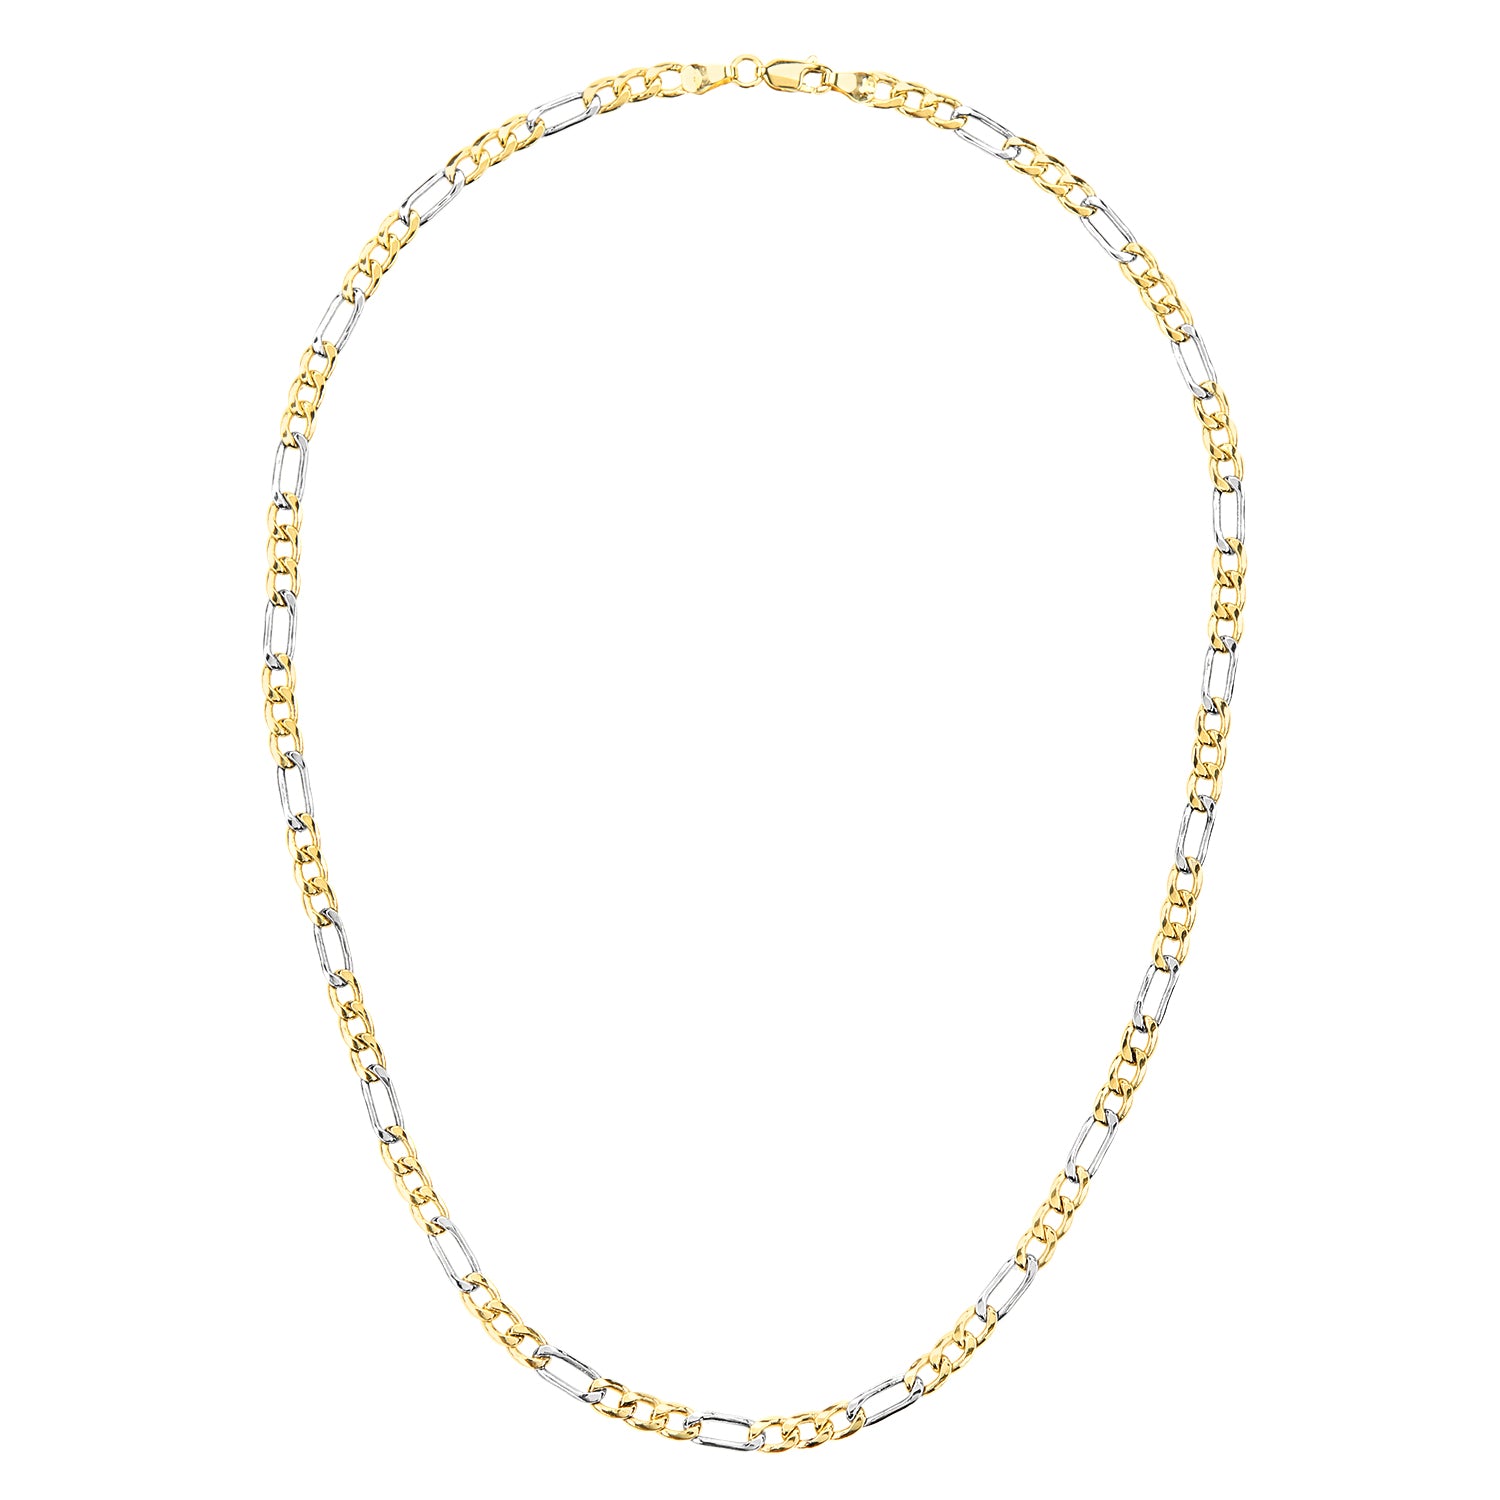 9ct White & Yellow Gold  Figaro Chain Necklace 5mm 18 inch - 120AXLHGR30YW-18